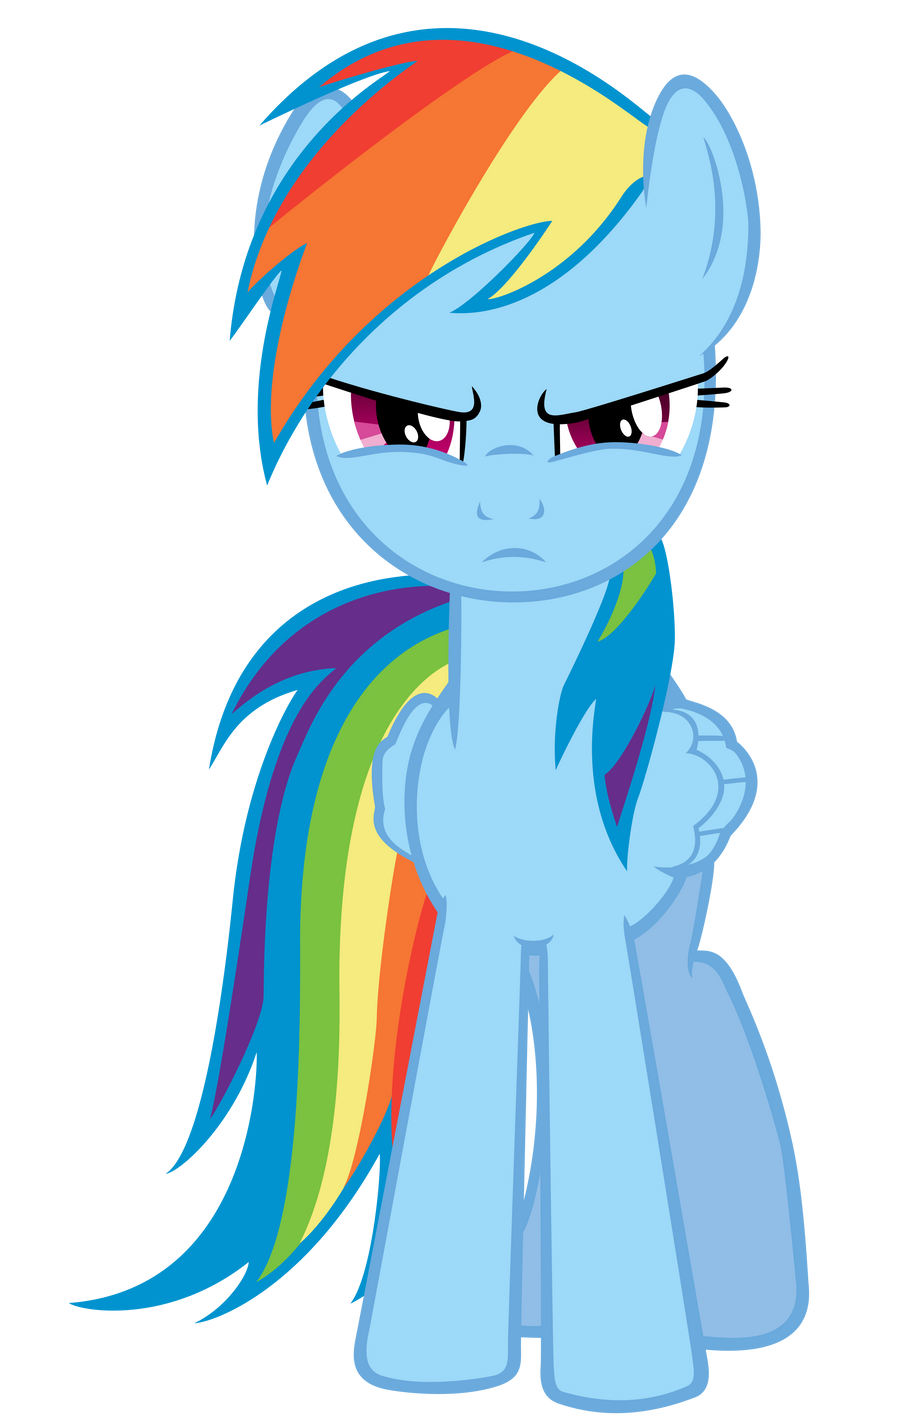 [Obrázek: rainbow_dash_intro_by_kired25-d53rgn4.png]